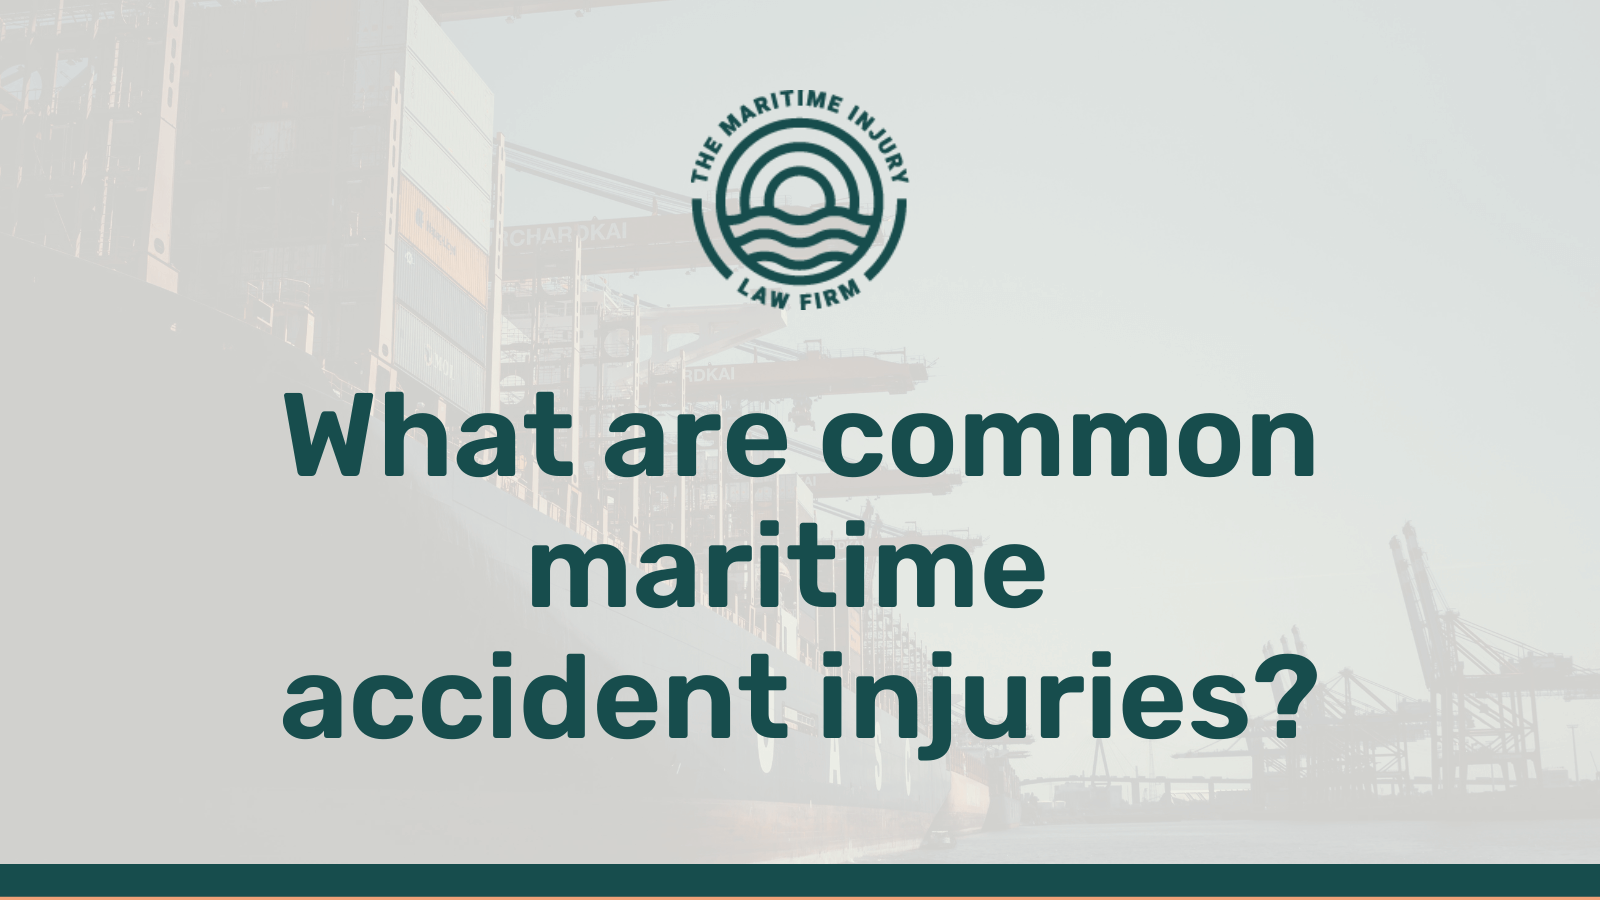 What are common maritime accident injuries - maritime injury law firm - George Vourvoulias